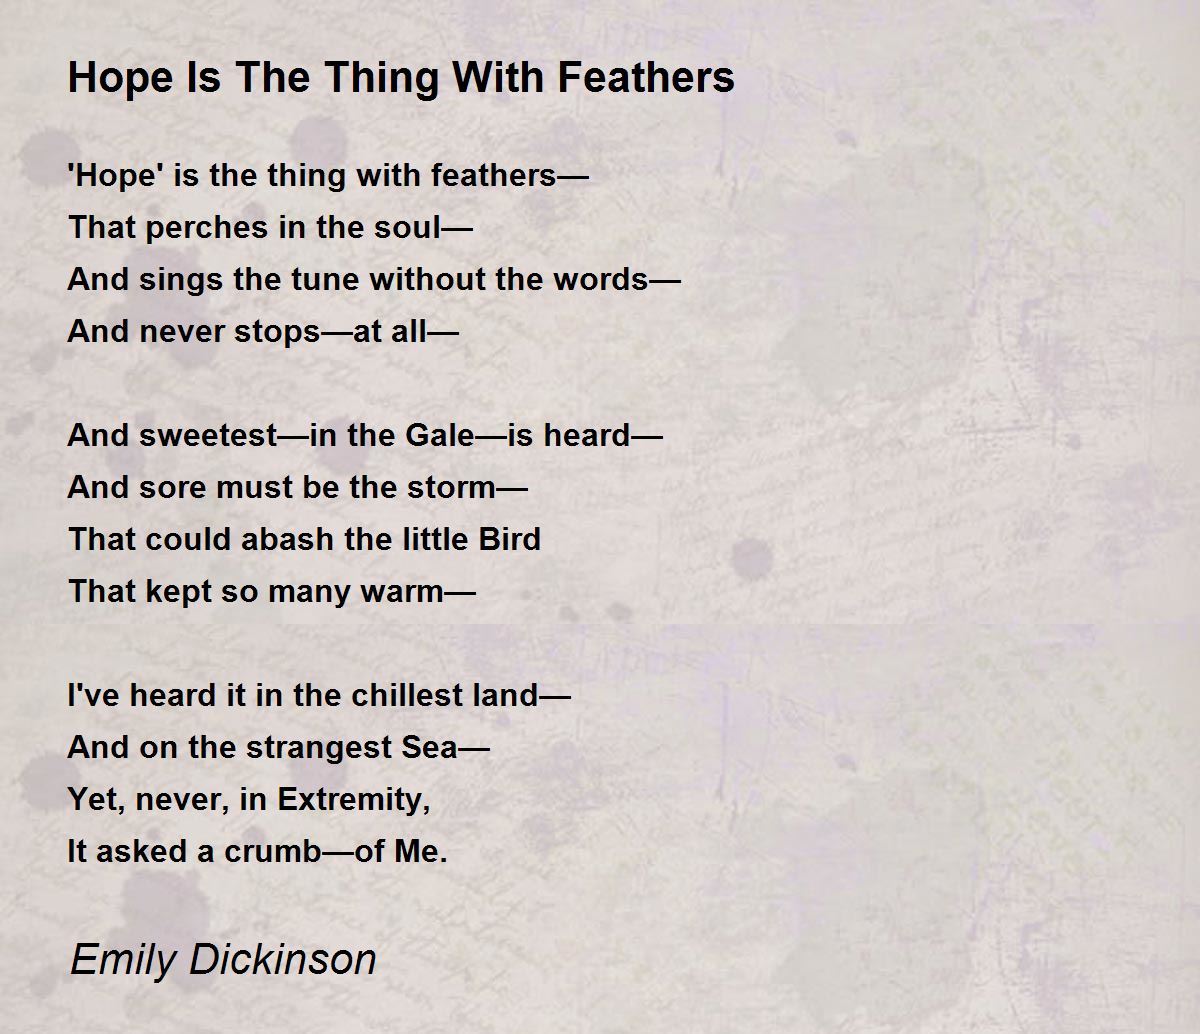 emily dickinson hope is the thing with feathers essay